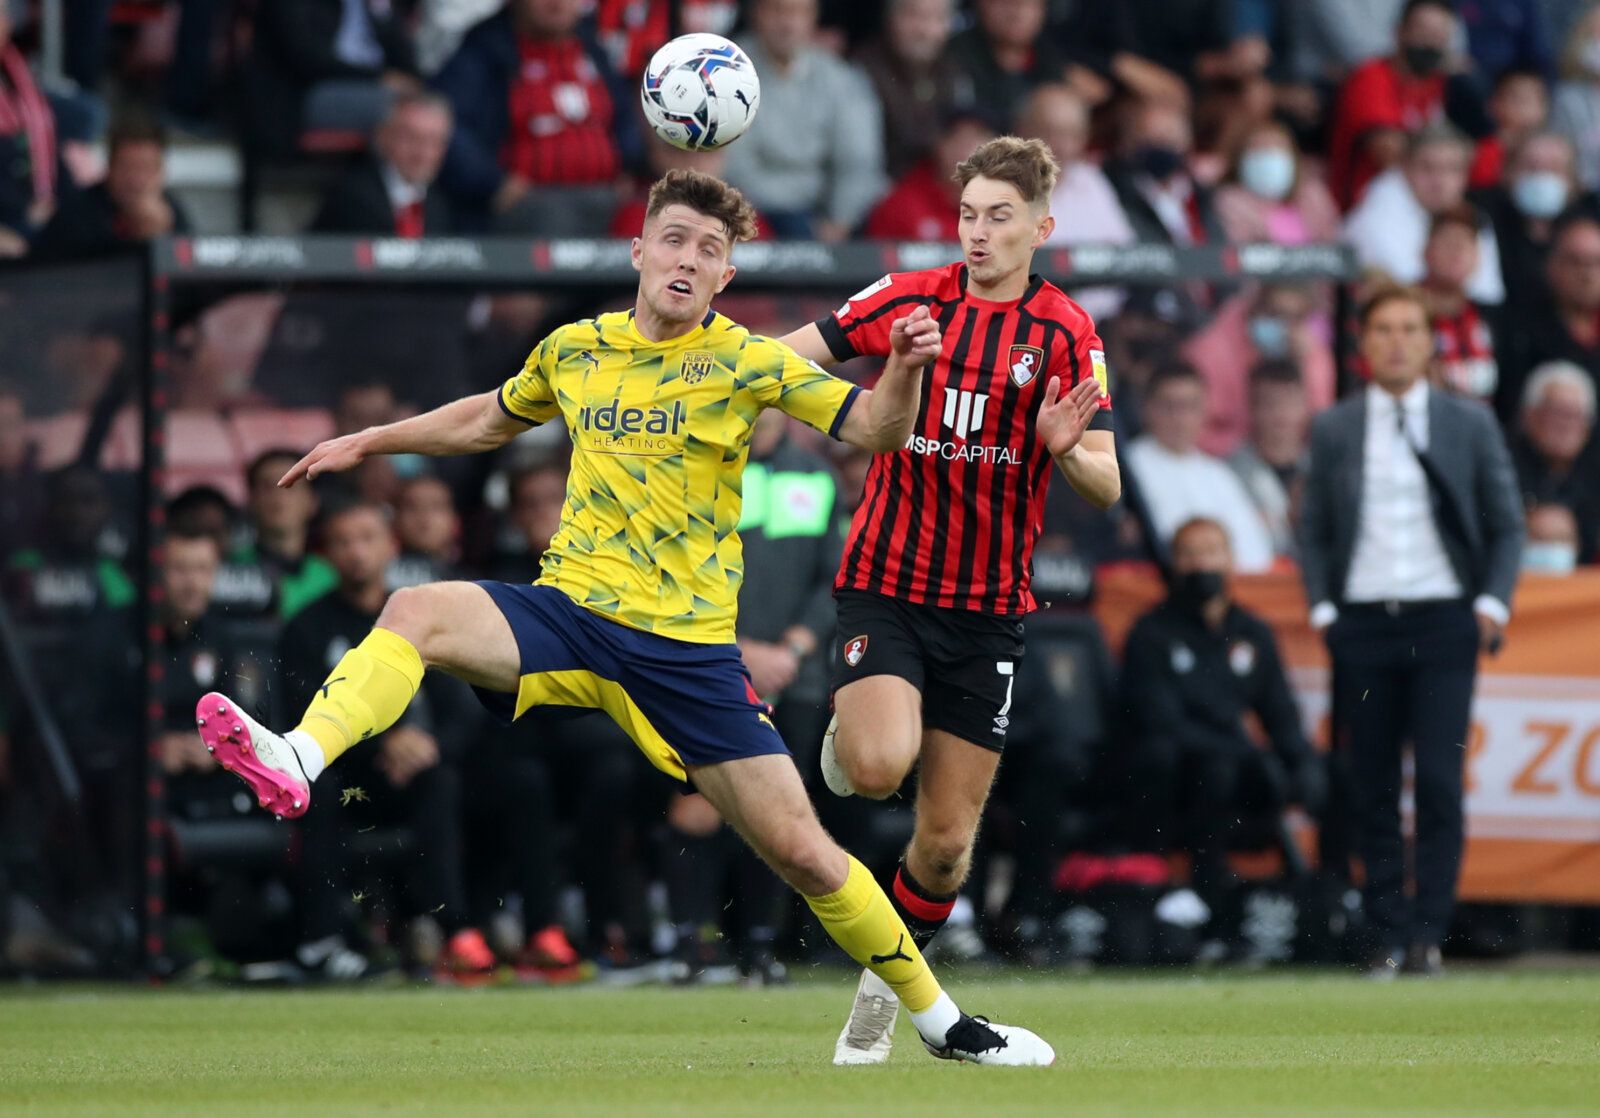 Soccer Football - Championship - AFC Bournemouth v West Bromwich Albion - Vitality Stadium, Bournemouth, Britain - August 6, 2021 Bournemouth´s David Brooks in action with West Bromwich Albion's Dara O'Shea Action Images/Peter Cziborra